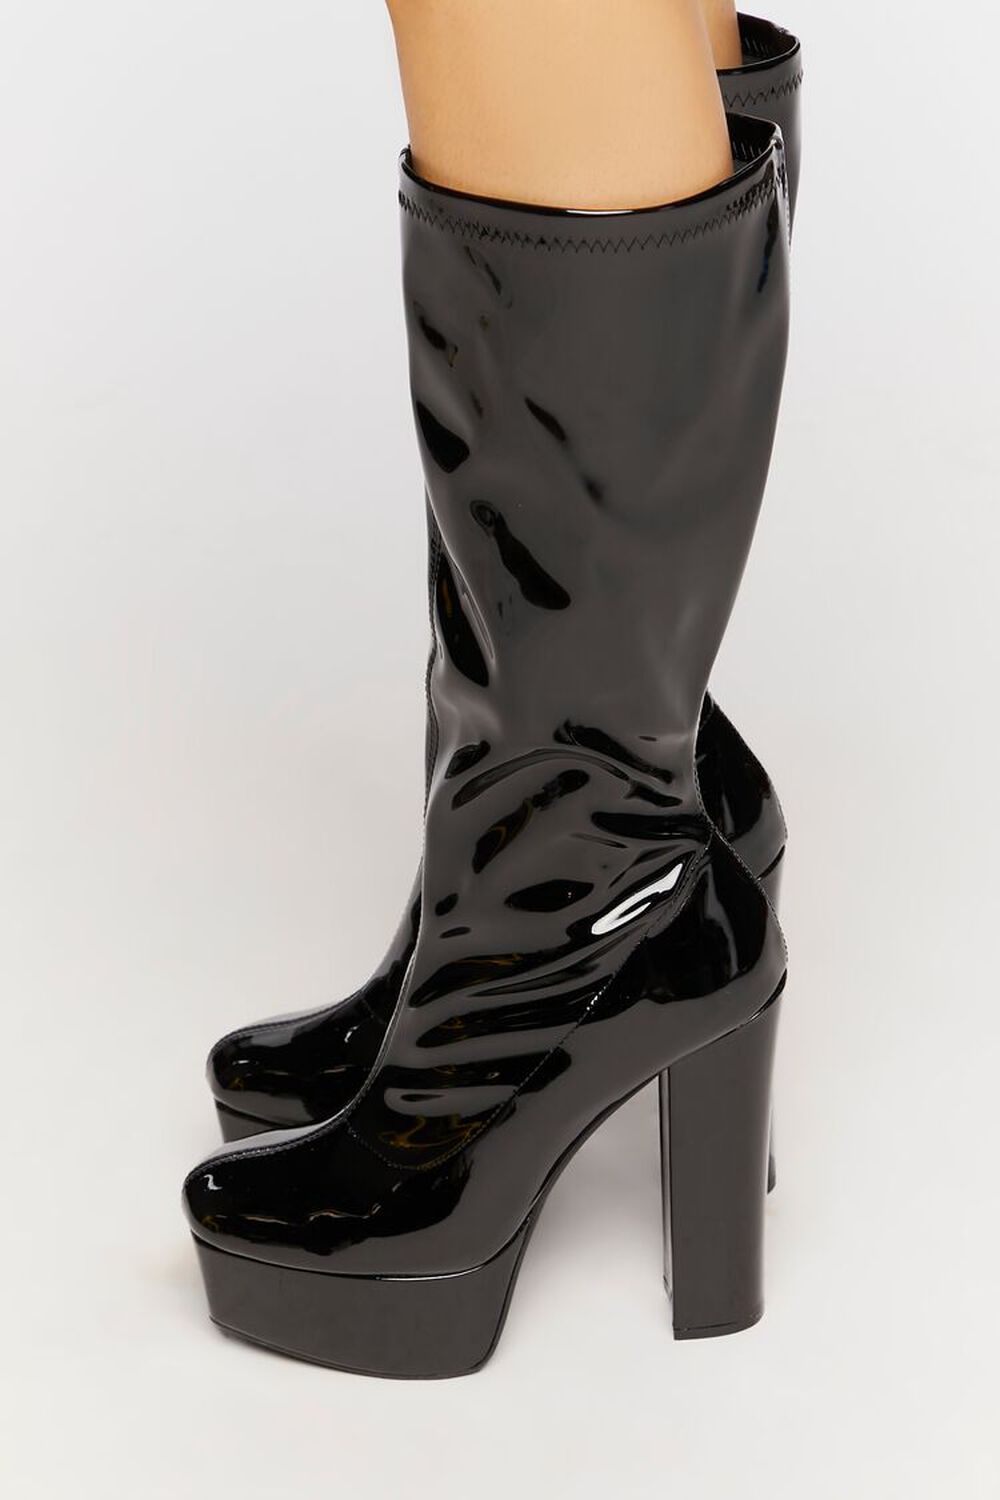 BLACK Faux Patent Leather Calf-High Boots, image 2